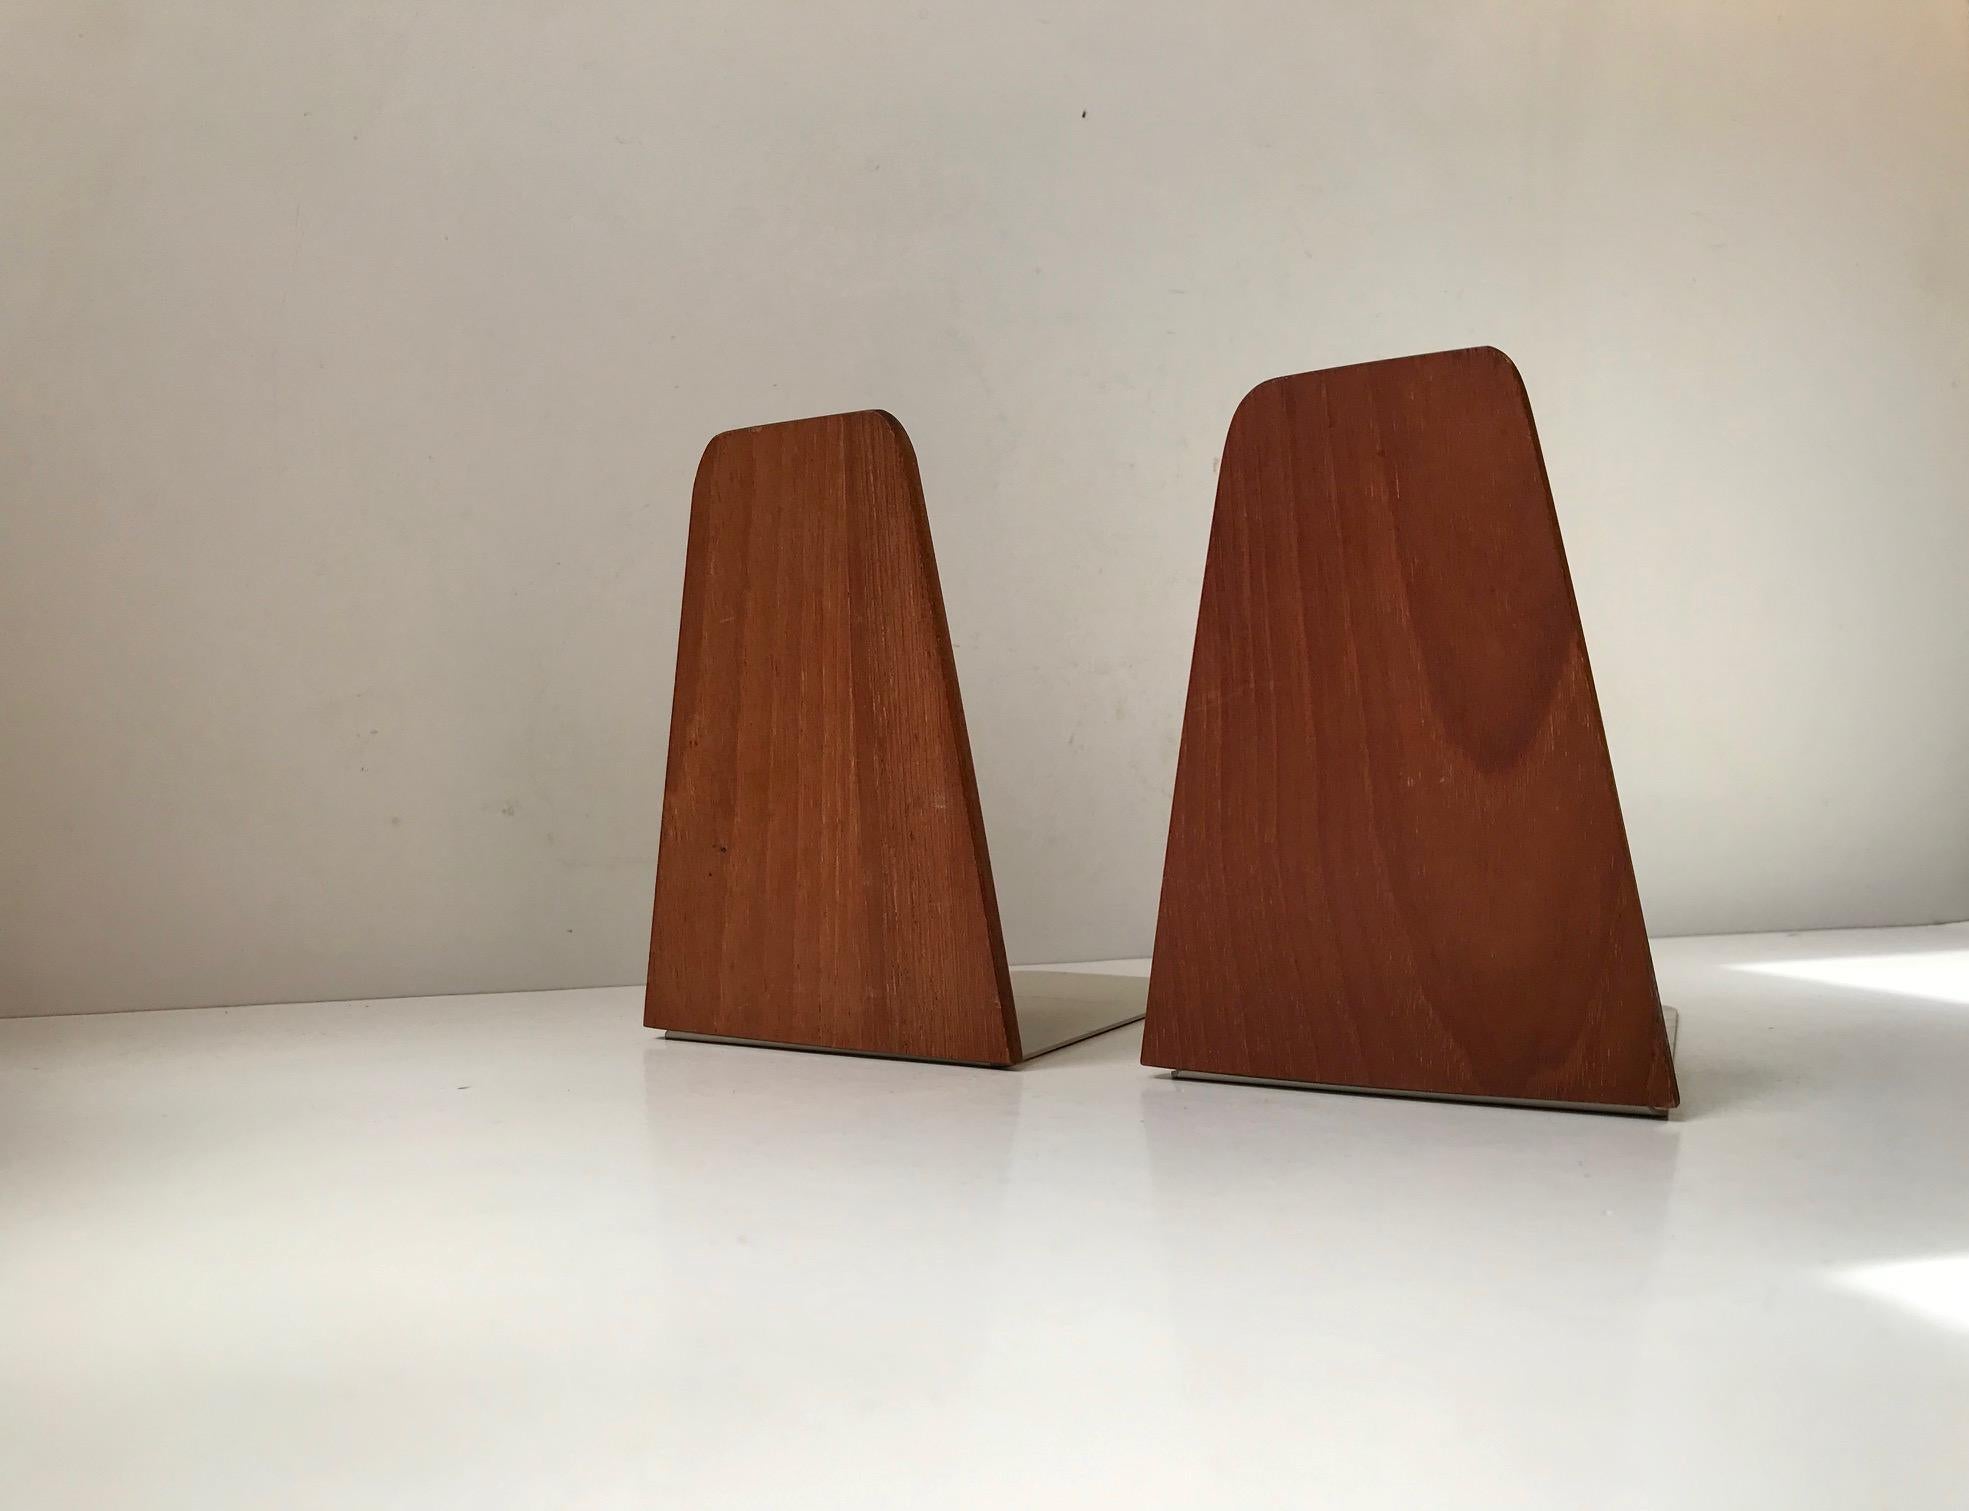 A set of 2 bookends in teak with steel rests. Designed by Kai Kristiansen and manufactured by FM Møbler in Denmark during the 1960s. These are the largest of two sizes.